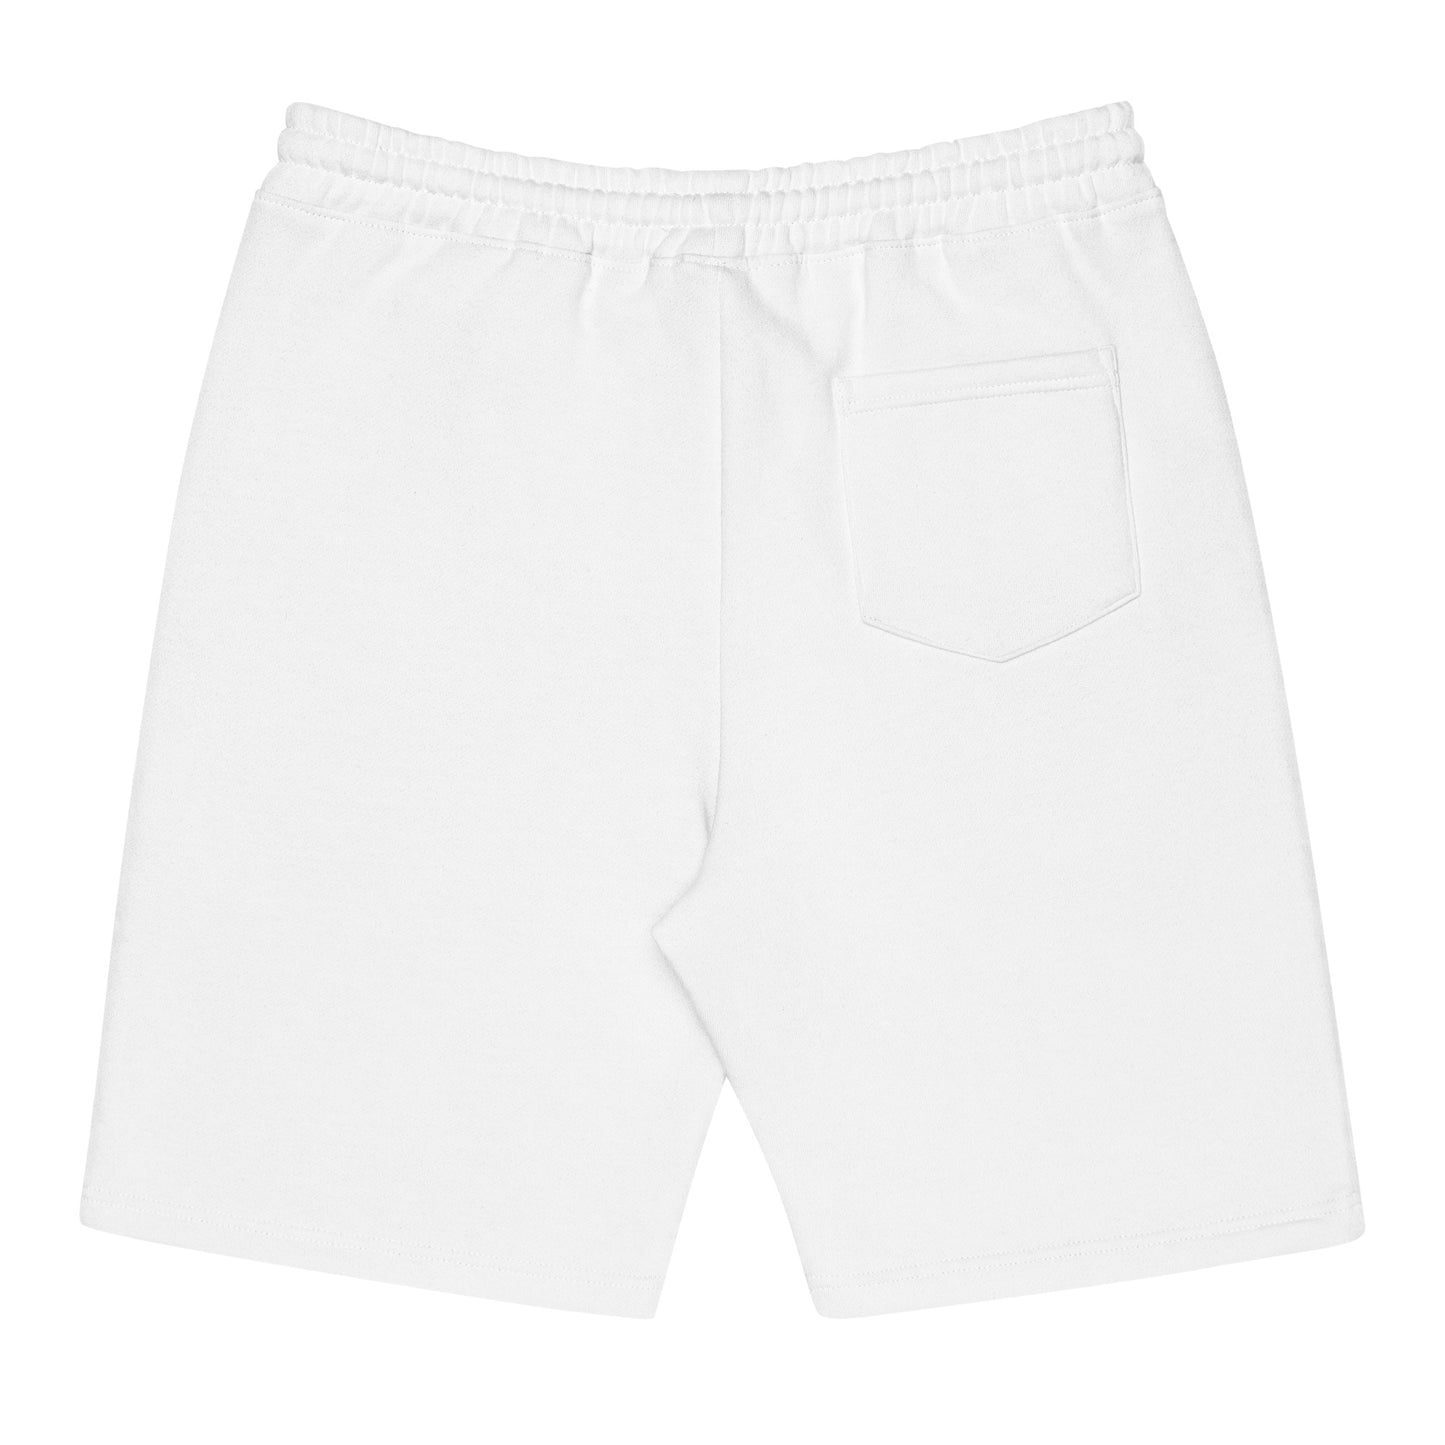 BE PATIENT Fleece Shorts (White and Gray)